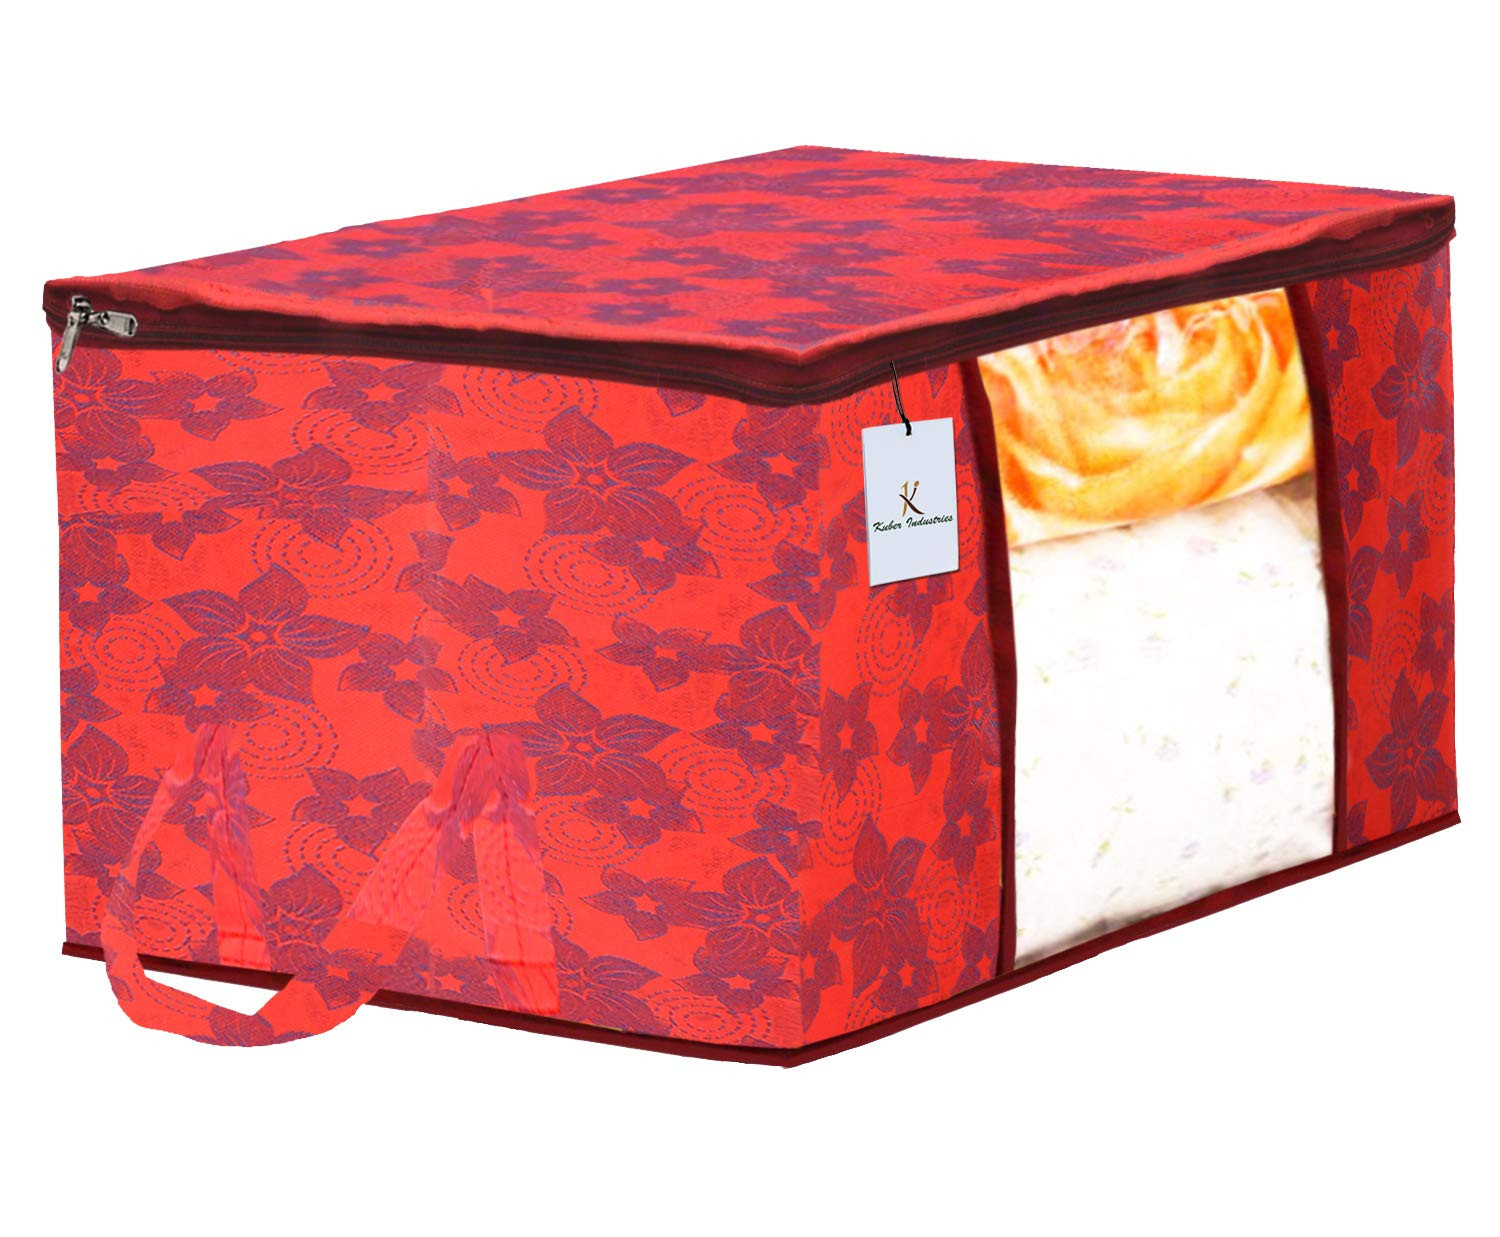 Kuber Industries Metalic Printed Non Woven Saree Cover And Underbed Storage Bag, Storage Organiser, Blanket Cover, Red & Beige & Brown  -CTKTC42399